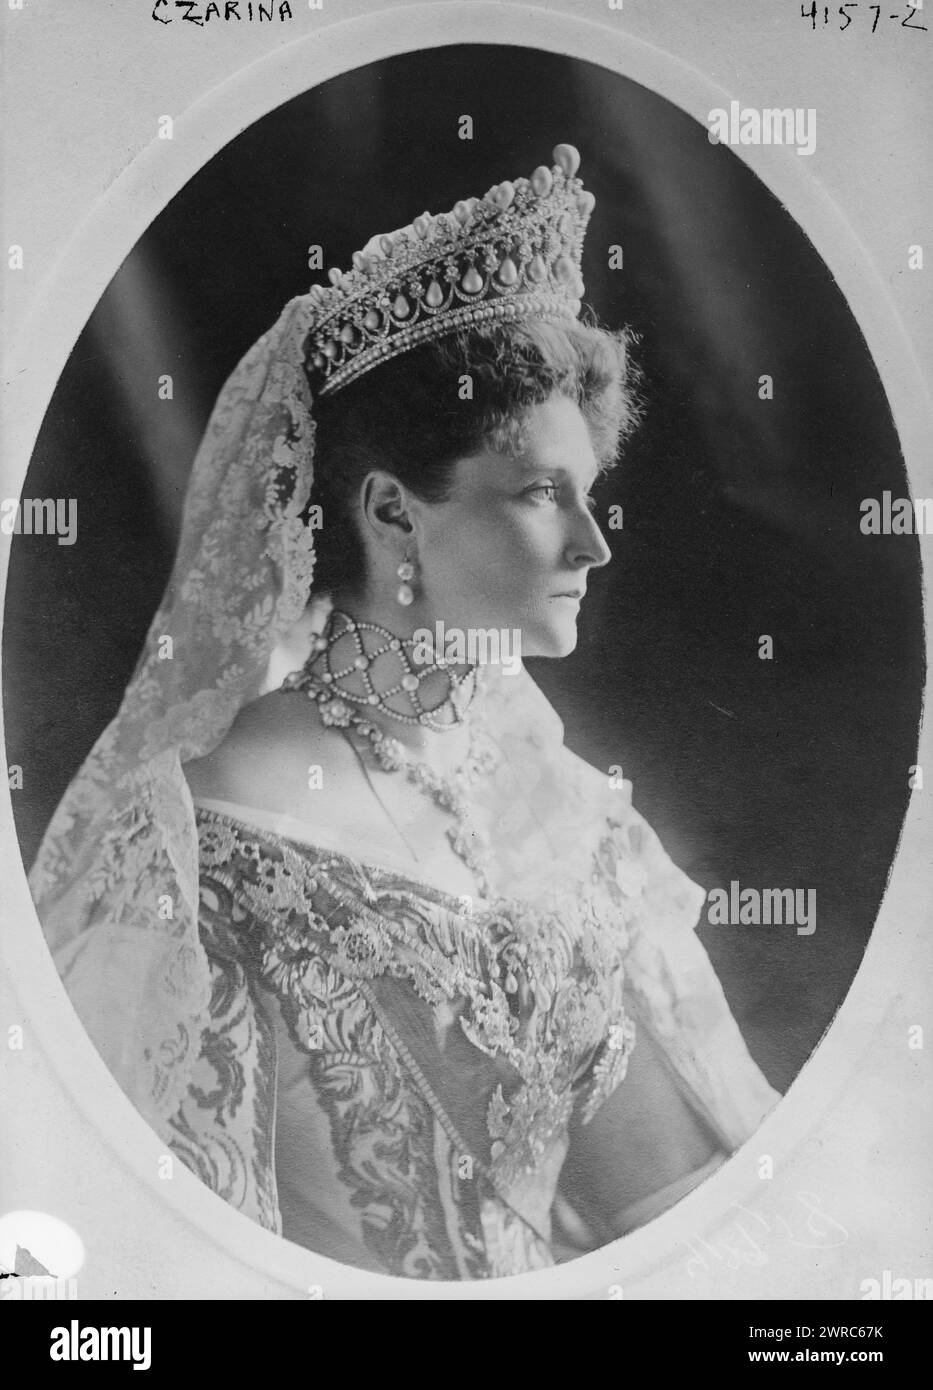 Czarina, Photograph shows a portrait of Alexandra Feodorovna, Alix of Hesse (1872-1918), the Empress Consort of Russia. The imperial presentation photograph was most likely taken in 1908 by photographers Frederick Boasson and Fritz Eggler., between ca. 1908? and 1918, Glass negatives, 1 negative: glass Stock Photo